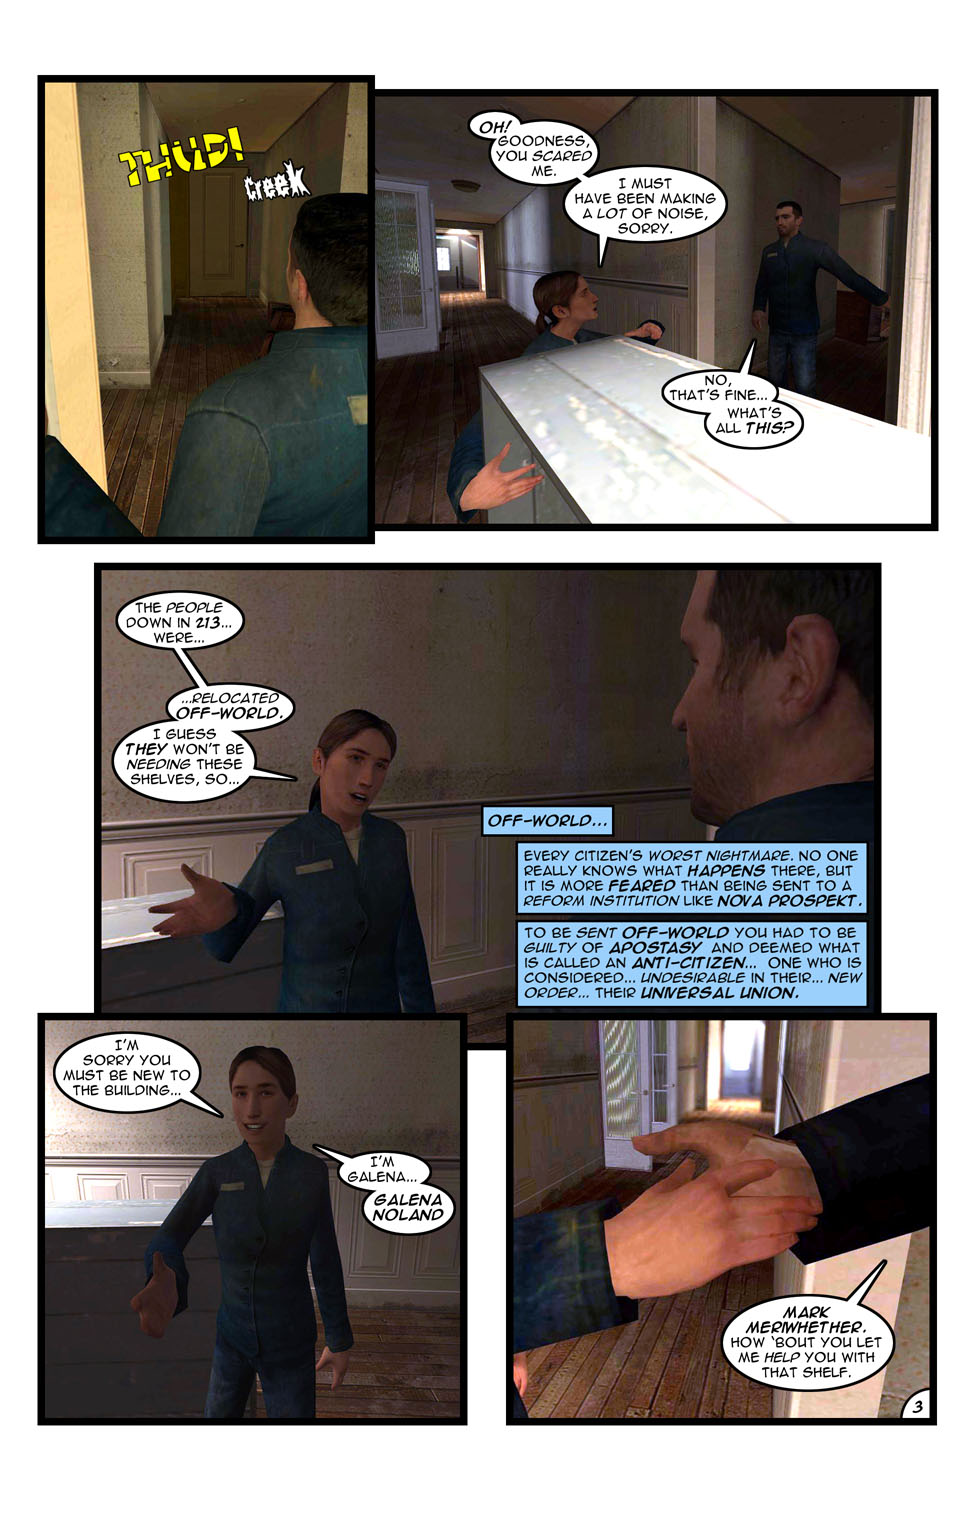 The noise is coming from outside. Mark opens the door and comes face-to-face with a woman carrying a shelf, who is also surprised to see him. She apologizes for the noise and explains that she is taking the shelves from another apartment whose inhabitants were relocated off-world, meaning they were sent off Earth to parts unknown. The woman introduces herself as Galena Noland. Mark offers her his help.